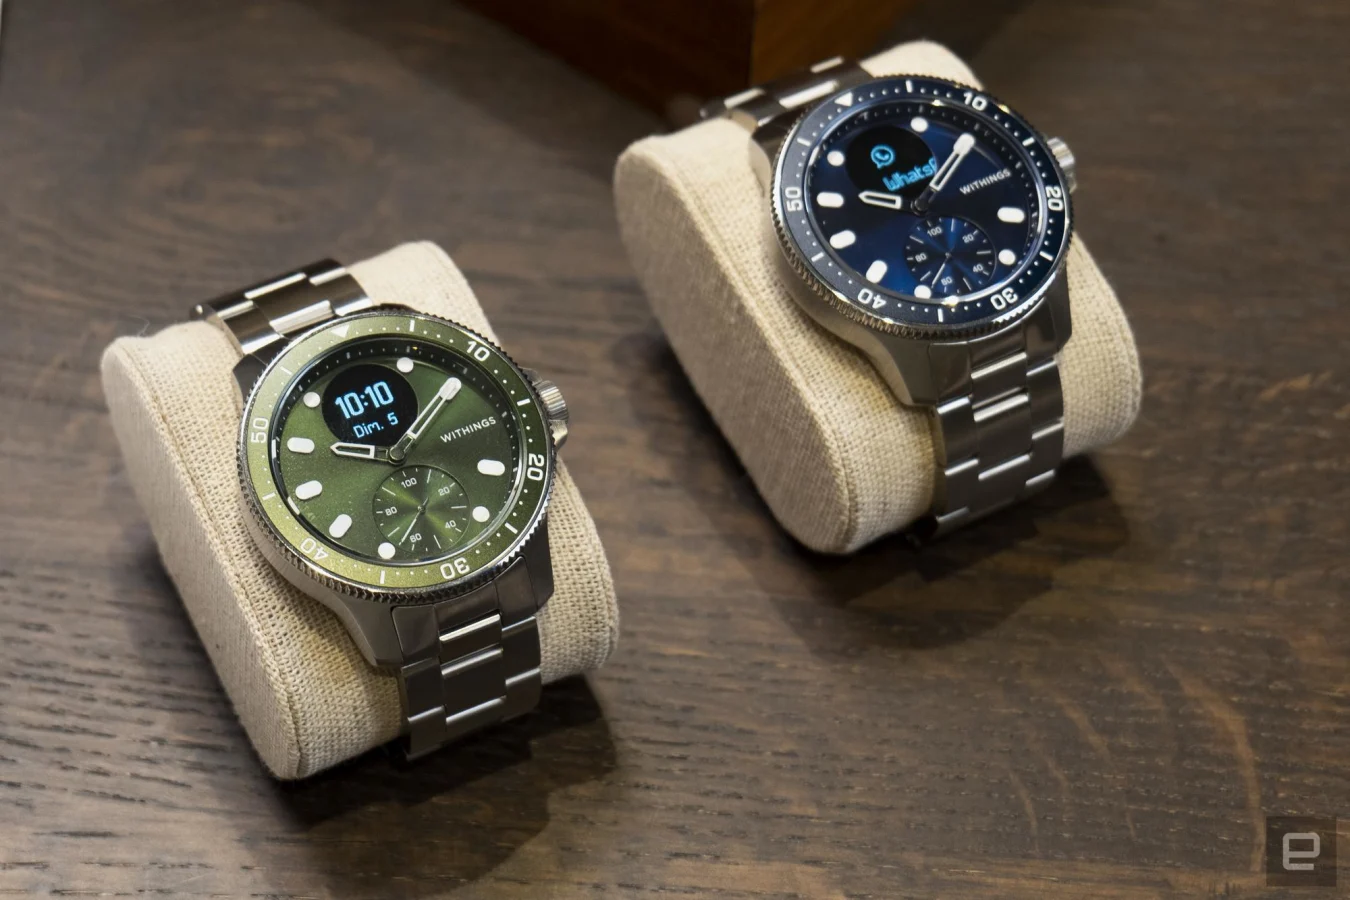 Withings puts its heart-monitoring ScanWatch in the body of a diver’s watch